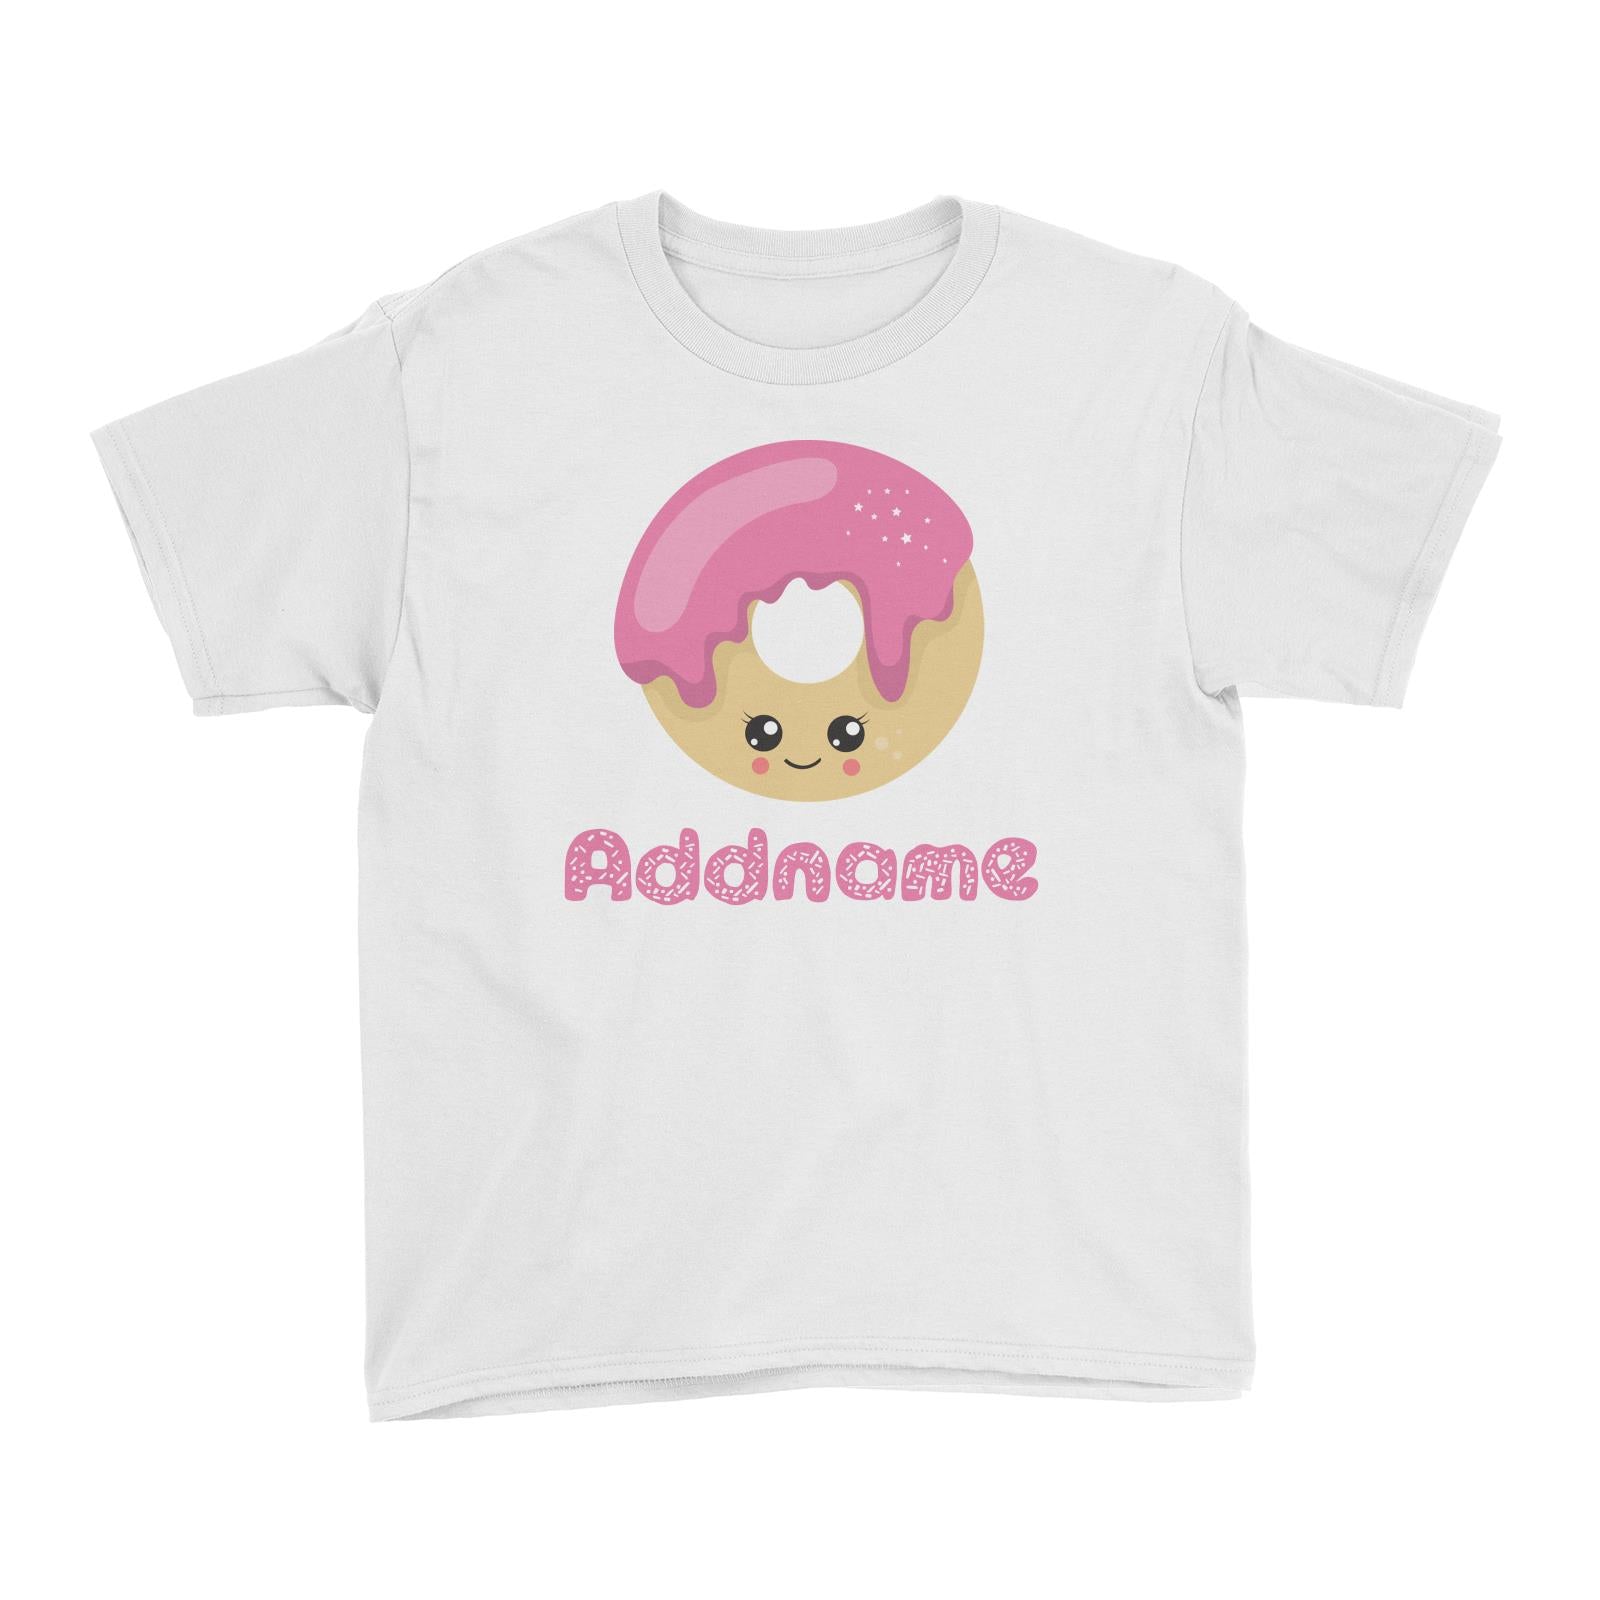 Magical Sweets Pink Donut Addname Kid's T-Shirt